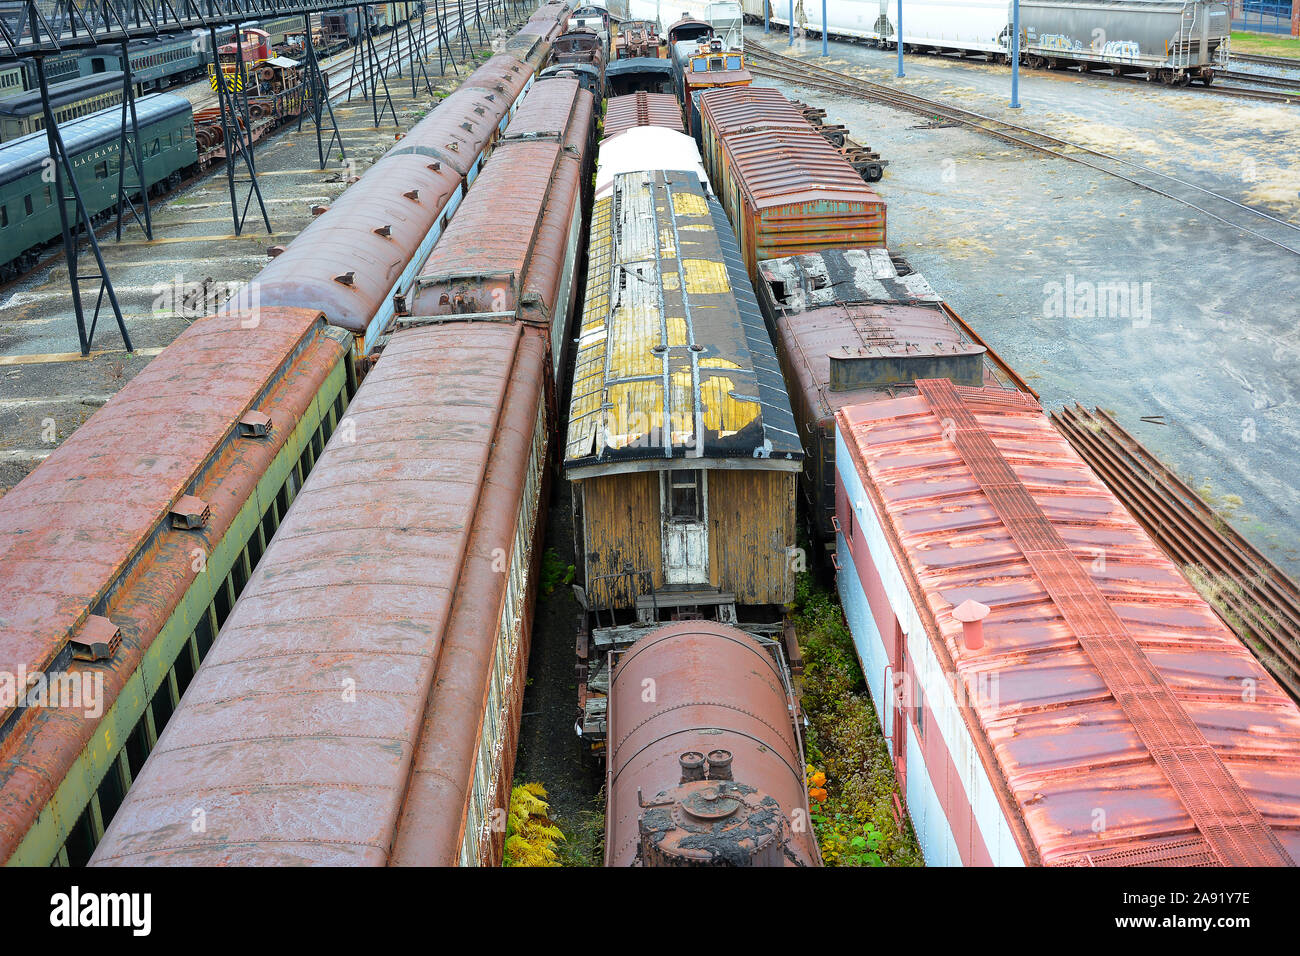 SCRANTON, PENNSYLVANIA - 30 OCT 2019: Old rail cars at Steamtown, a National Historic Site. Stock Photo